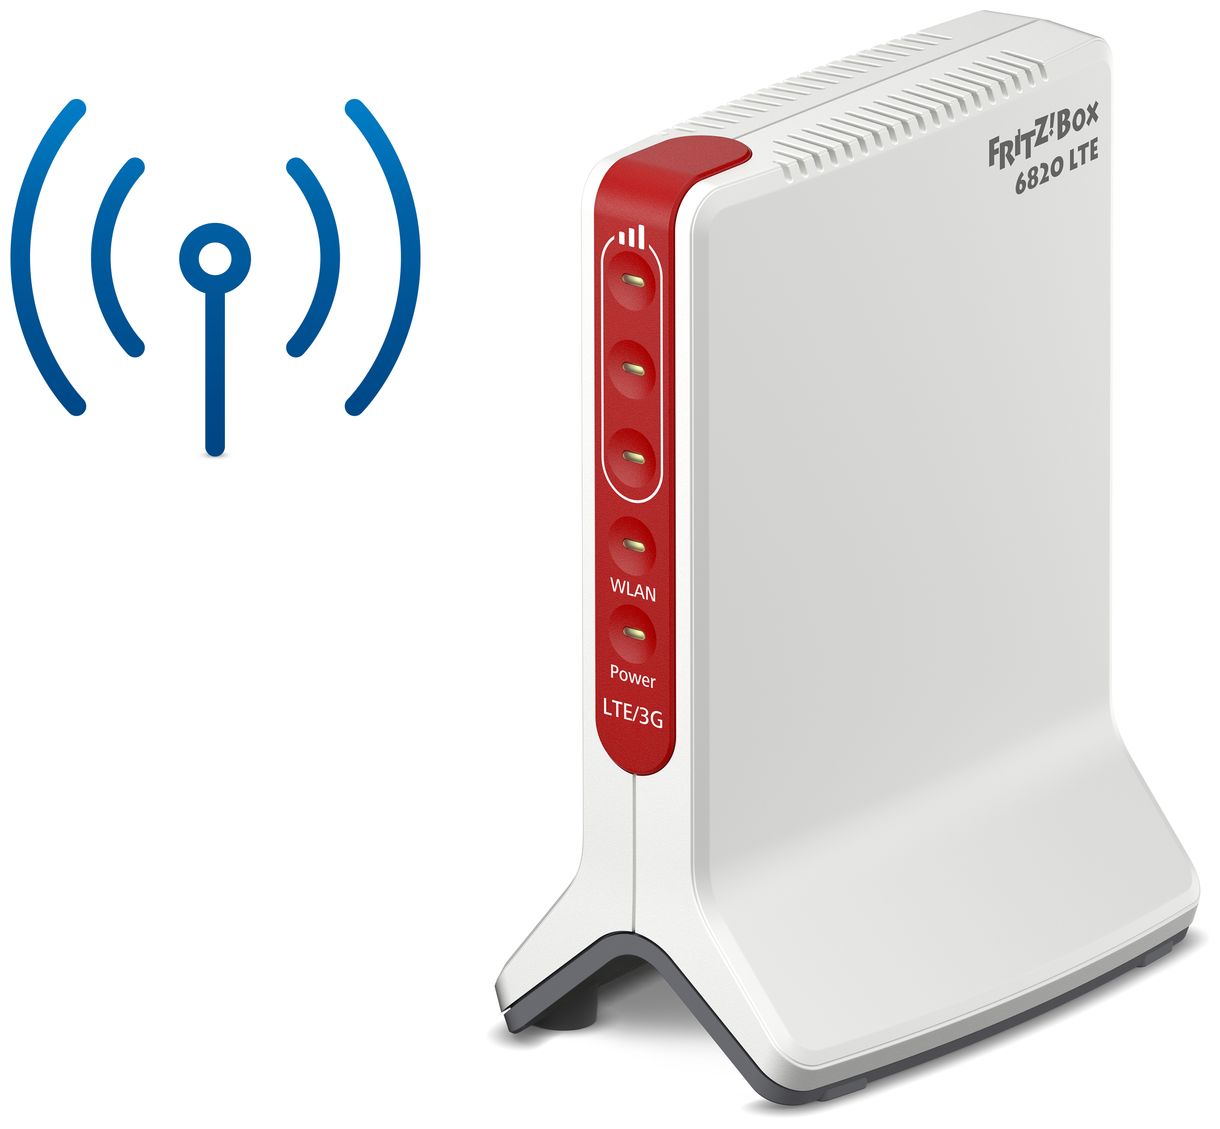 FRITZ!Box 6820 LTE Wi-Fi 4 (802.11n) Router Einzelband (2,4GHz) 450 Mbit/s 